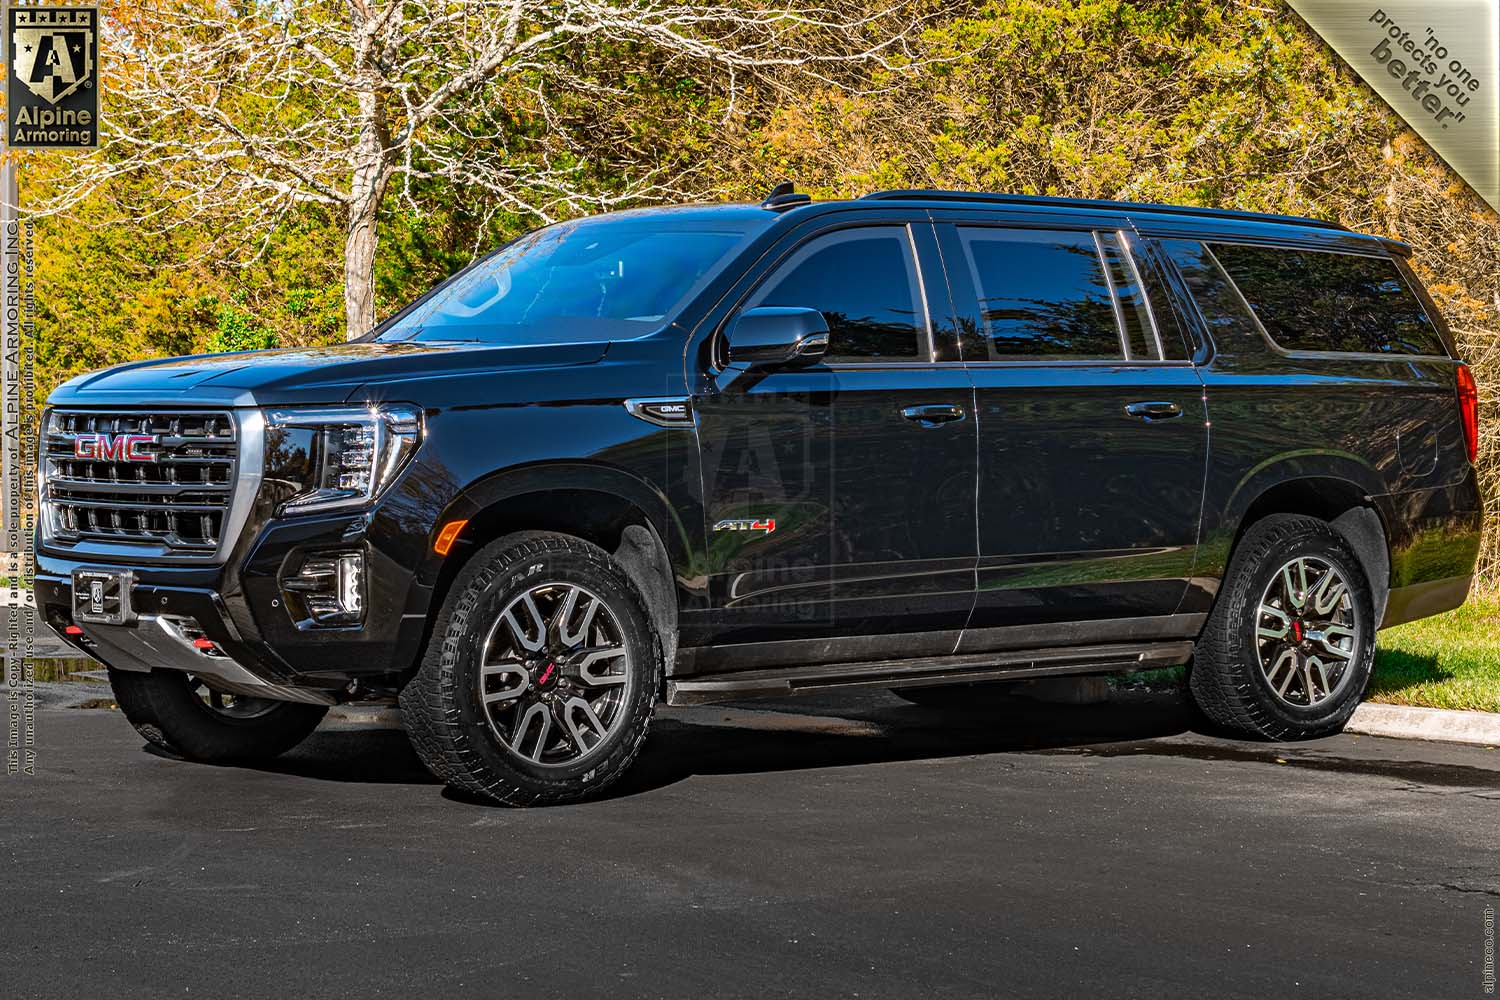 New Inventory armored GMC Yukon XL 4WD AT4 Level A9/B6+ Exterior & Interior Images VIN:8264